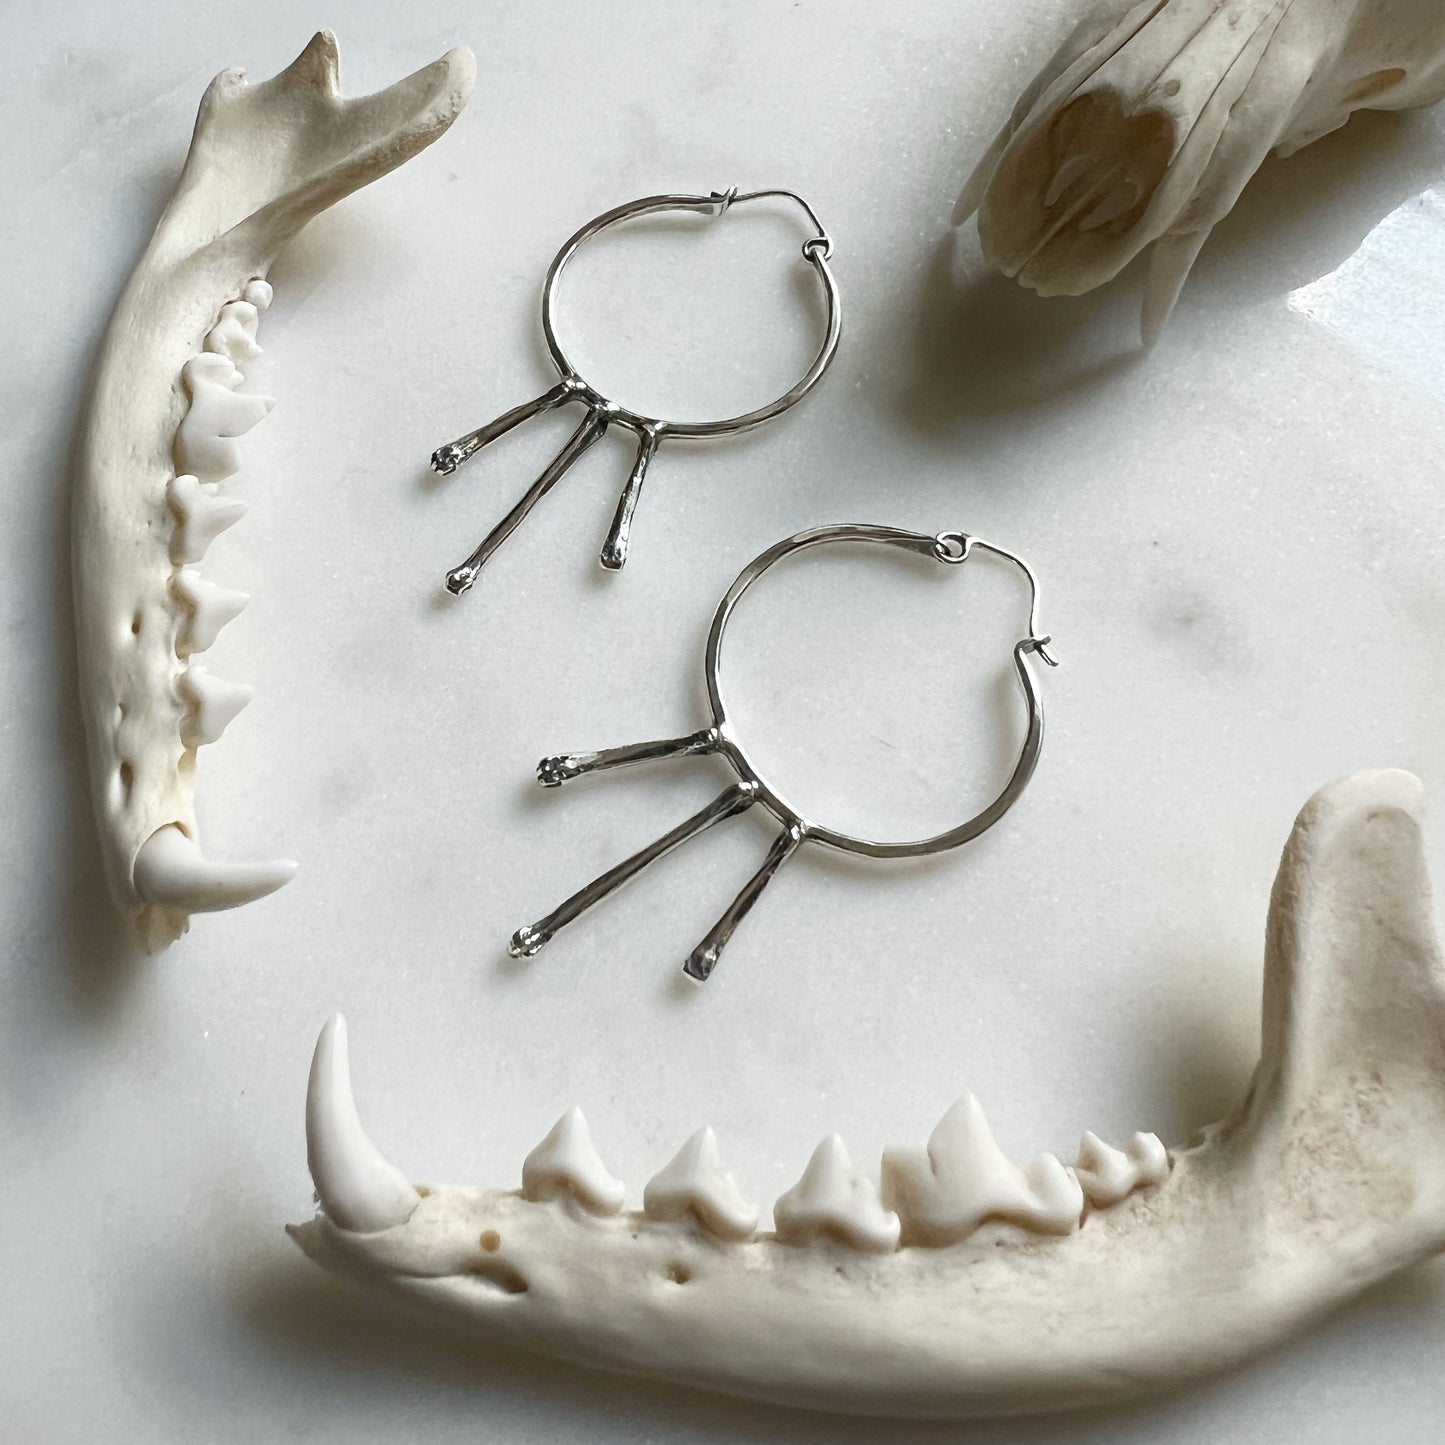 Small hoops with Squirrel toe and foot bones